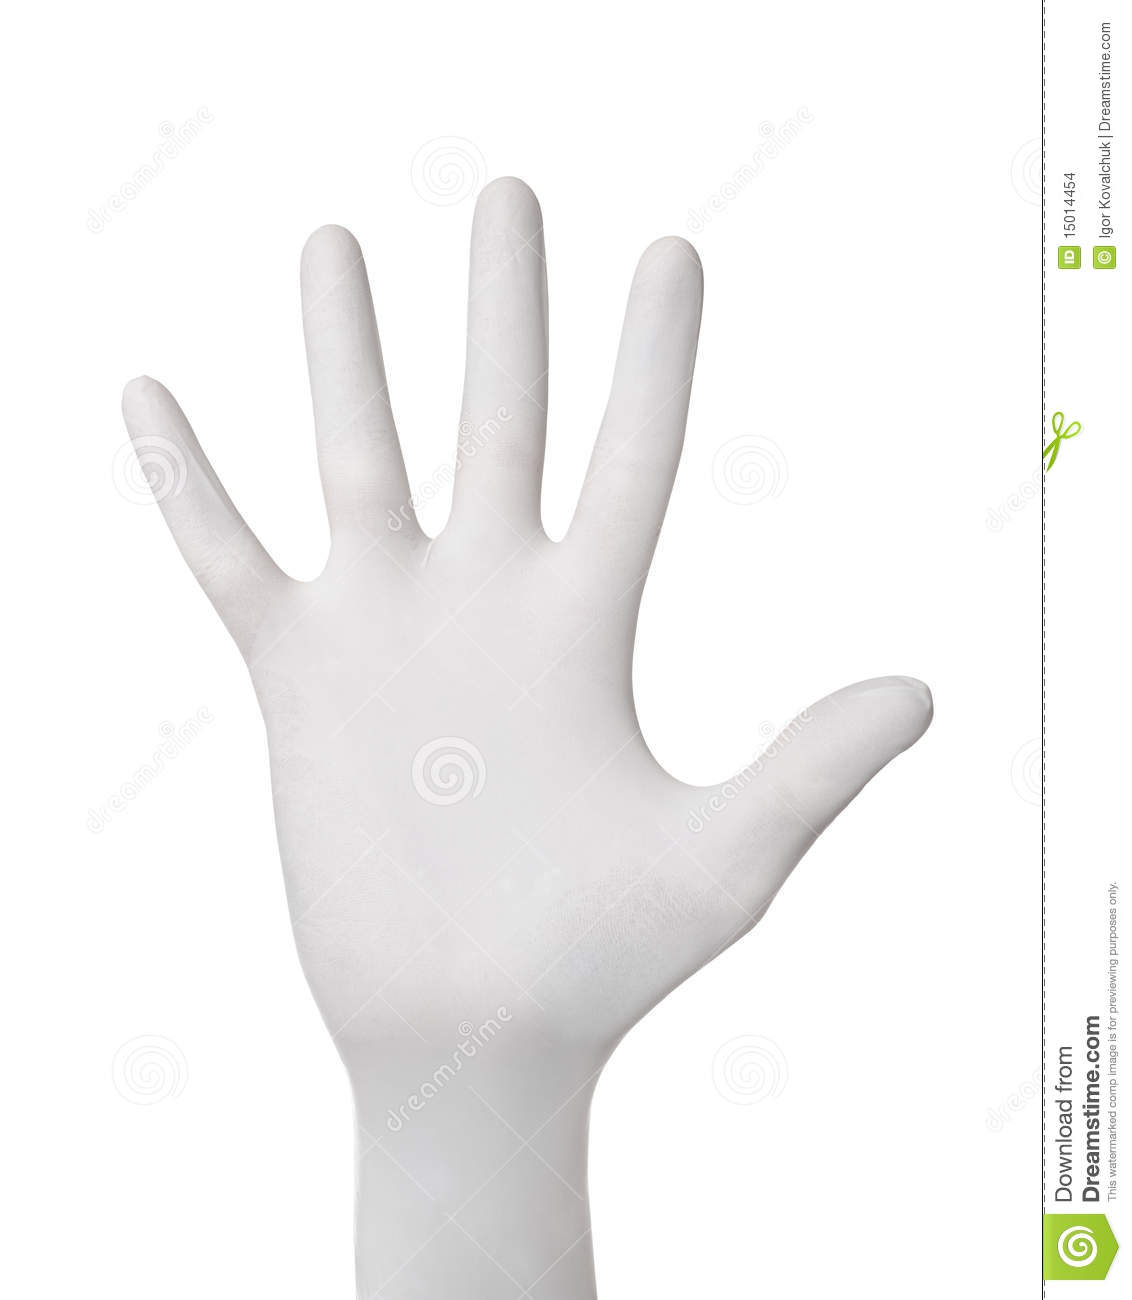 More Similar Stock Images Of   Hand Gesture In Glove